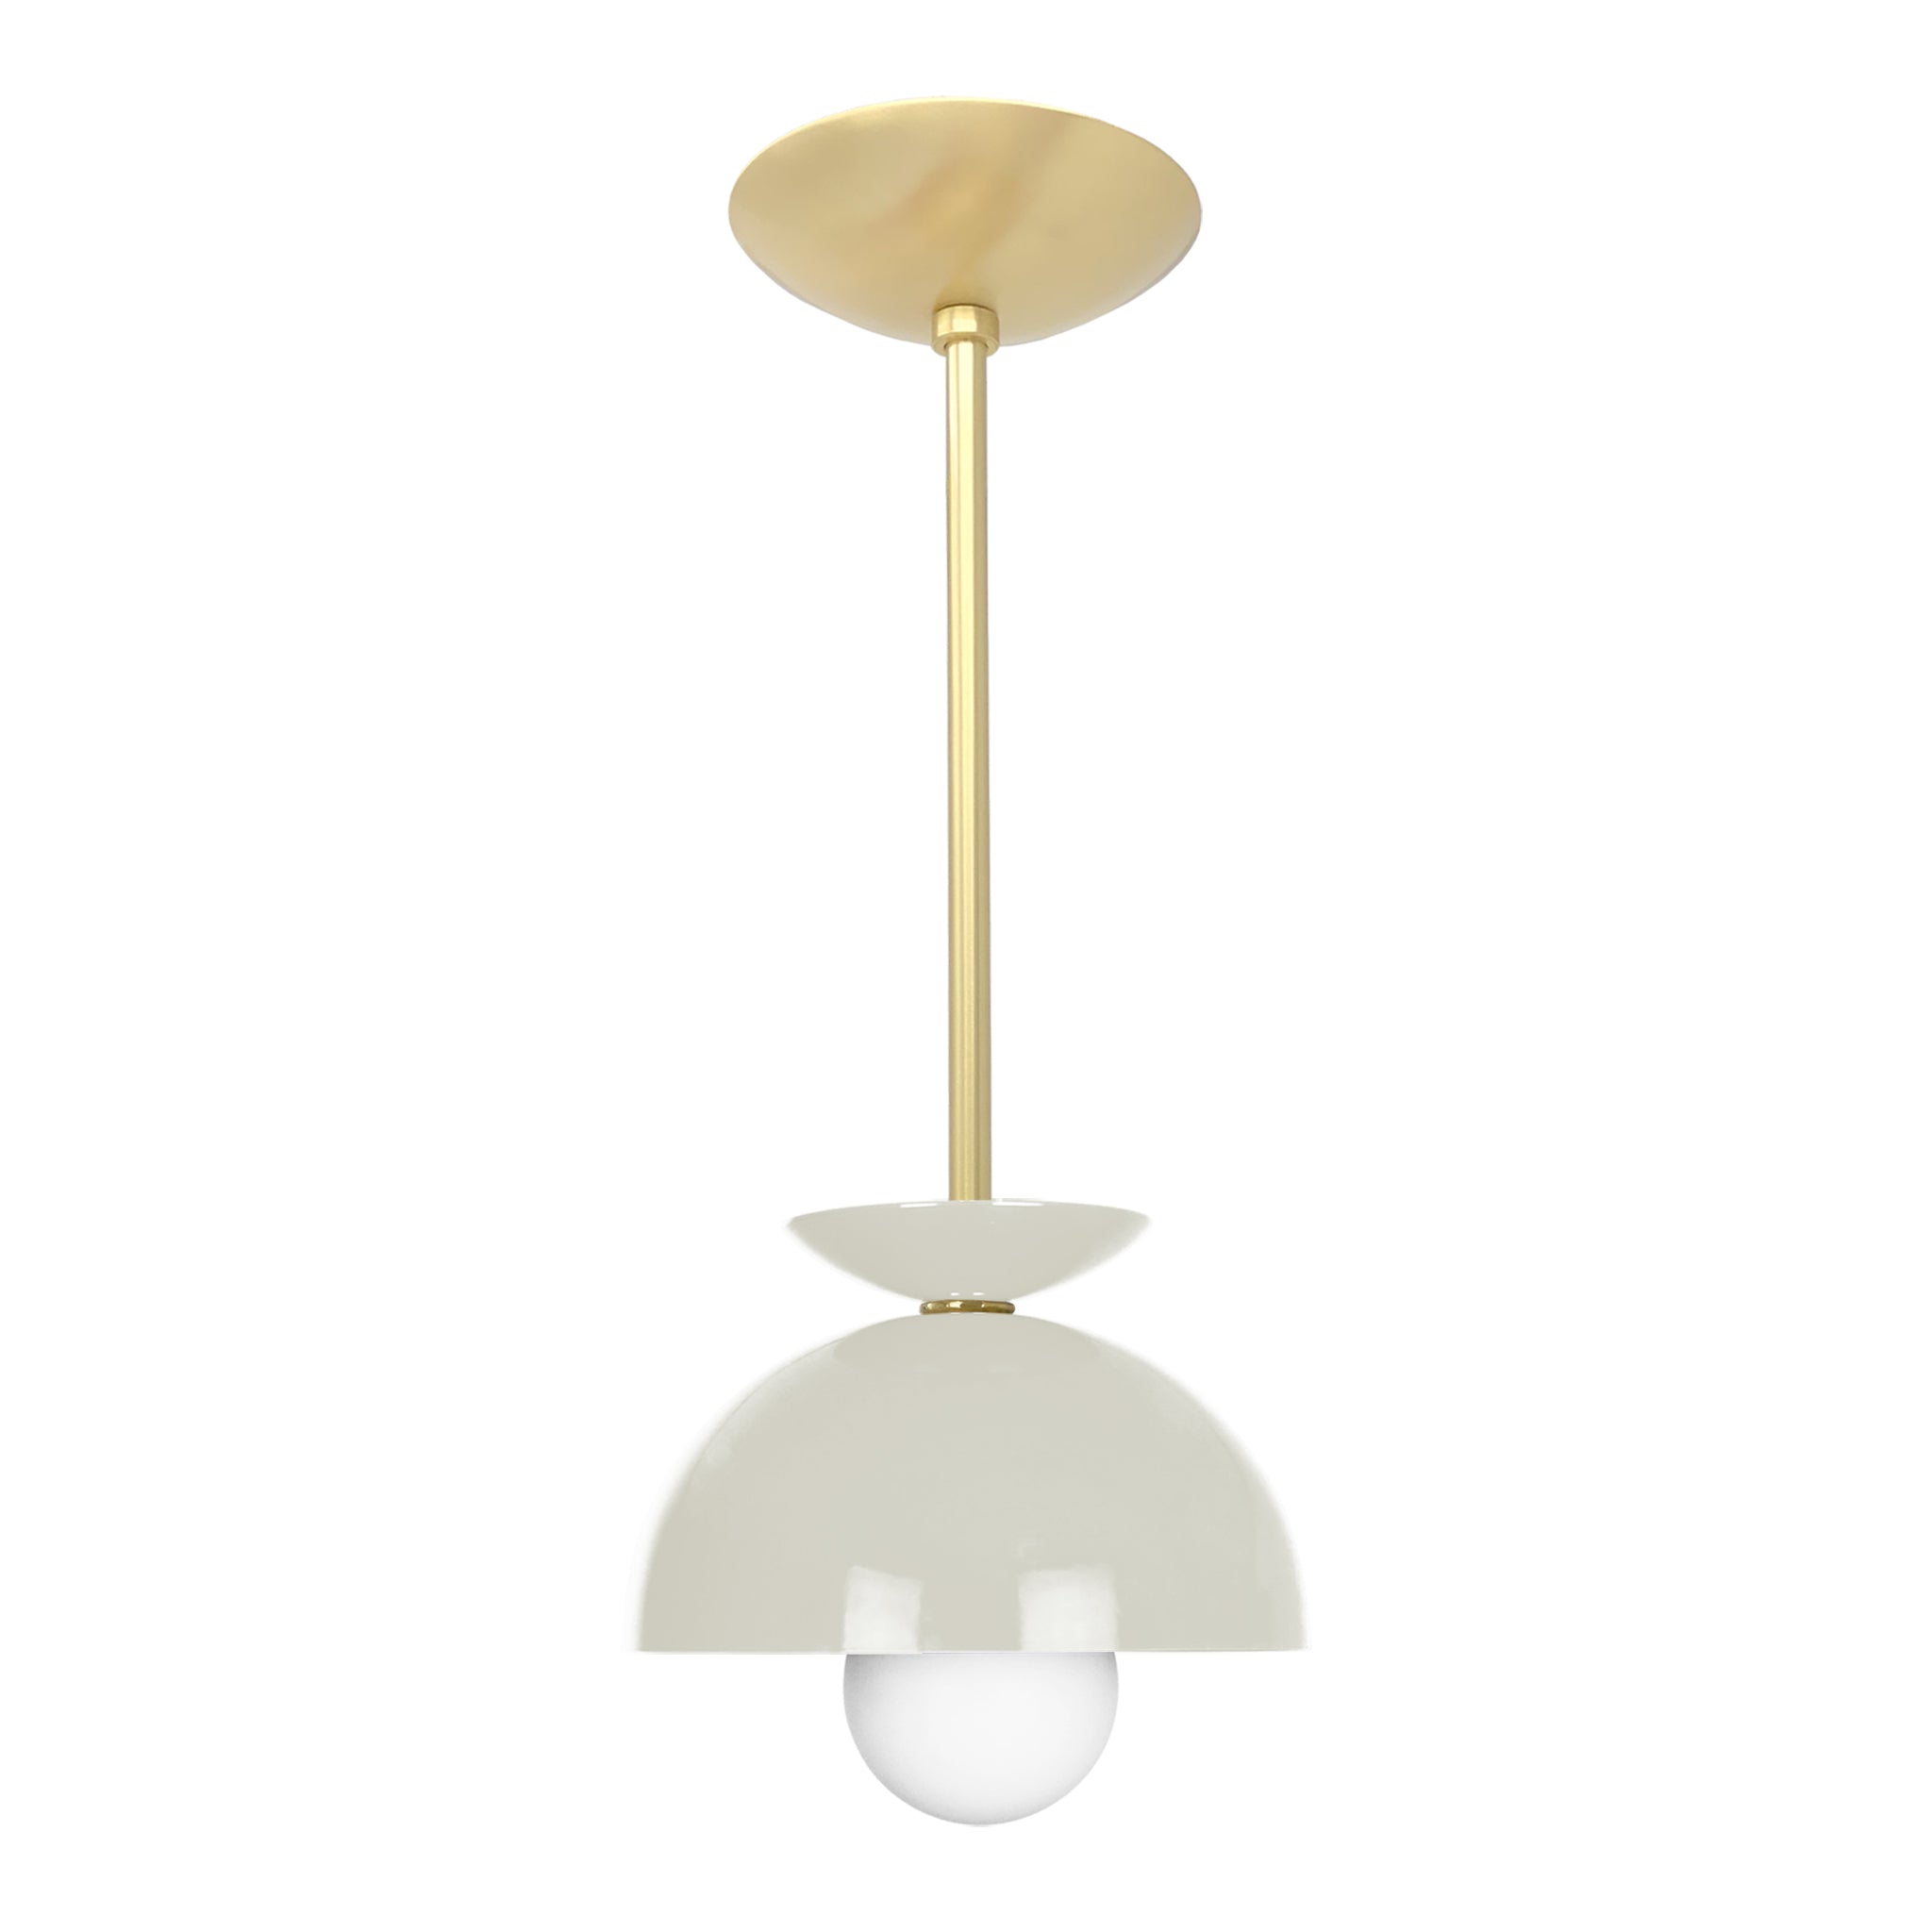 Brass and bone color Echo pendant 8" Dutton Brown lighting